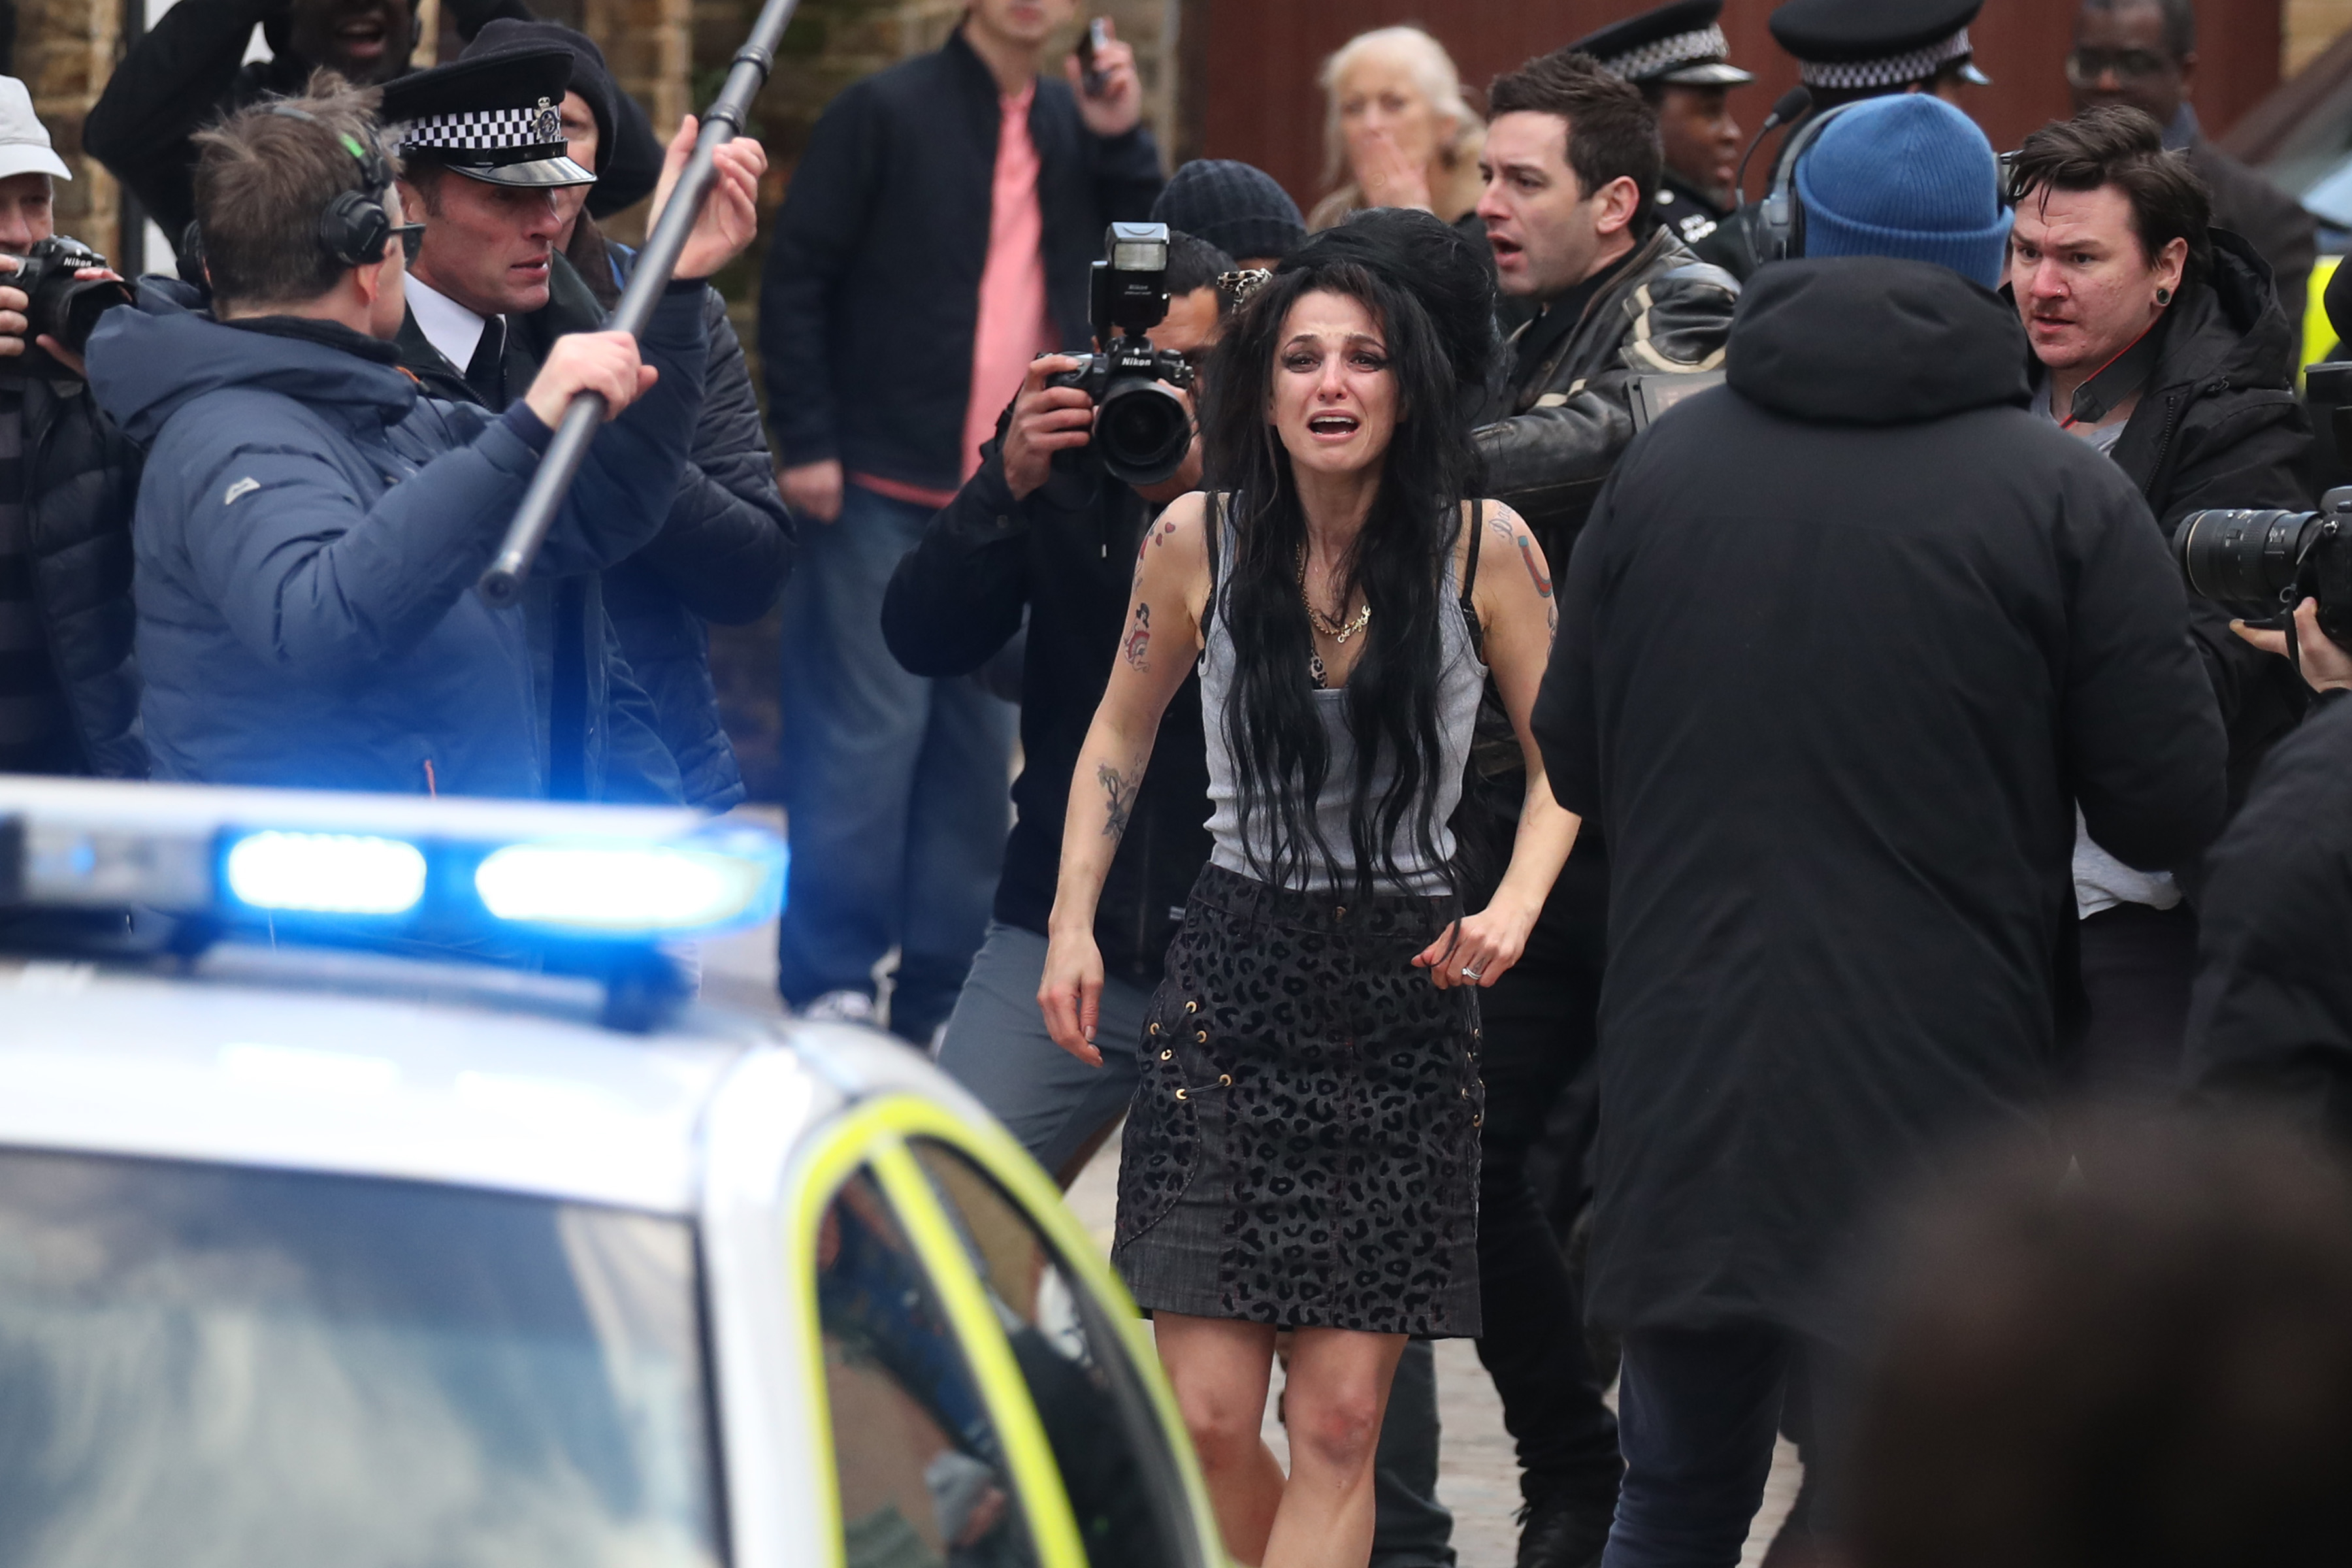 Marisa Abela as Amy Winehouse in distress, surrounded by paparazzi and police